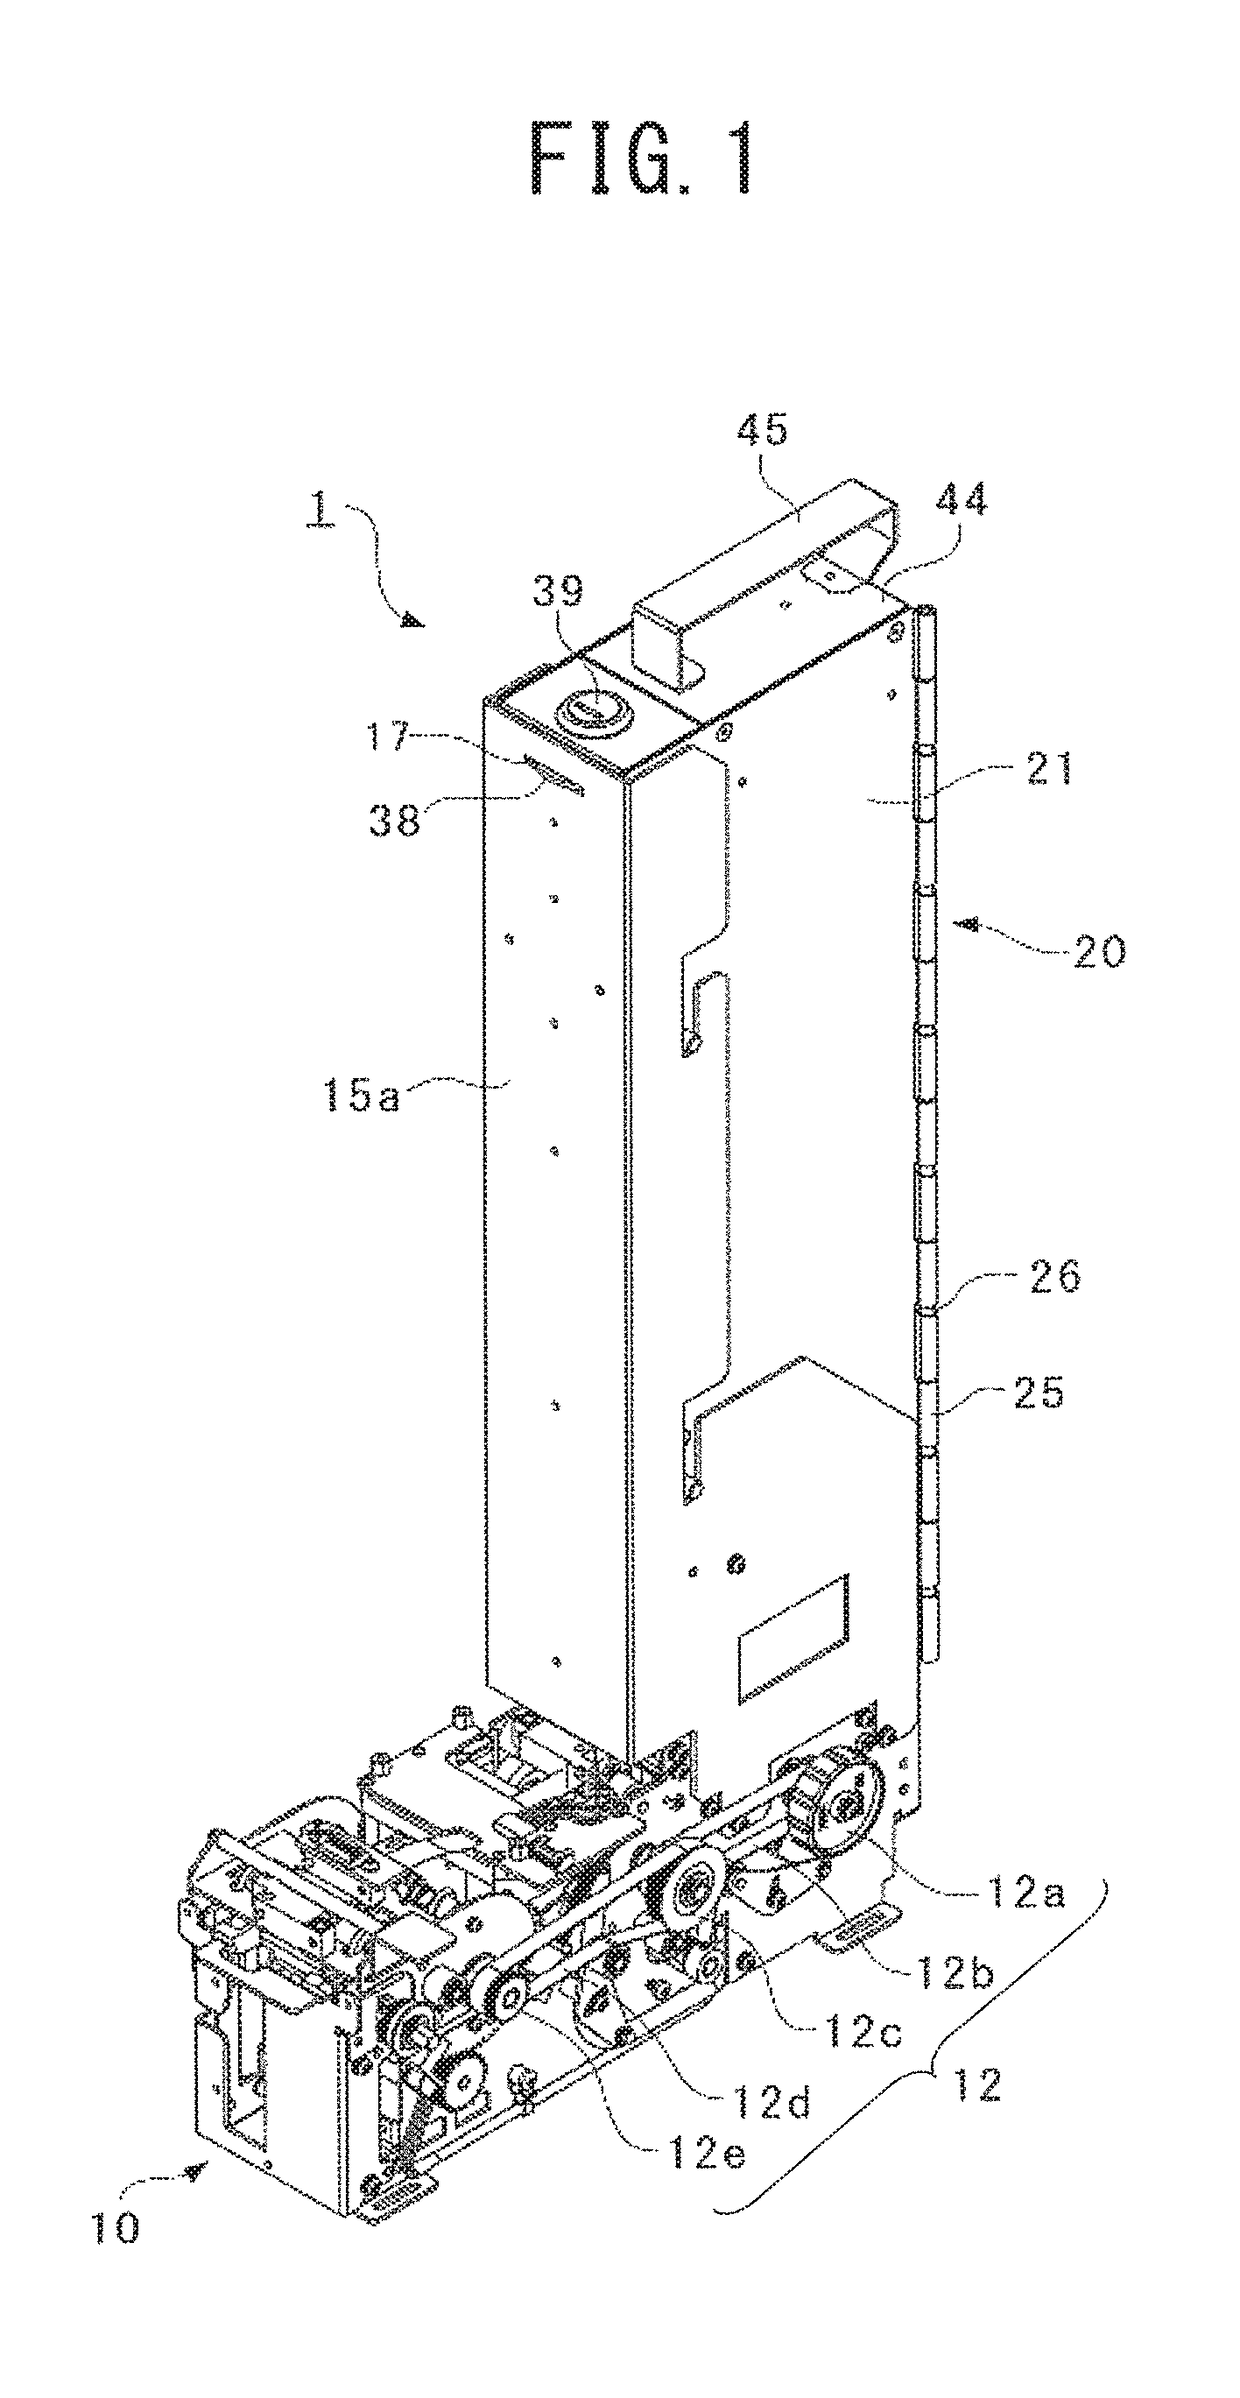 Card cassette device and card dispensing apparatus using the same